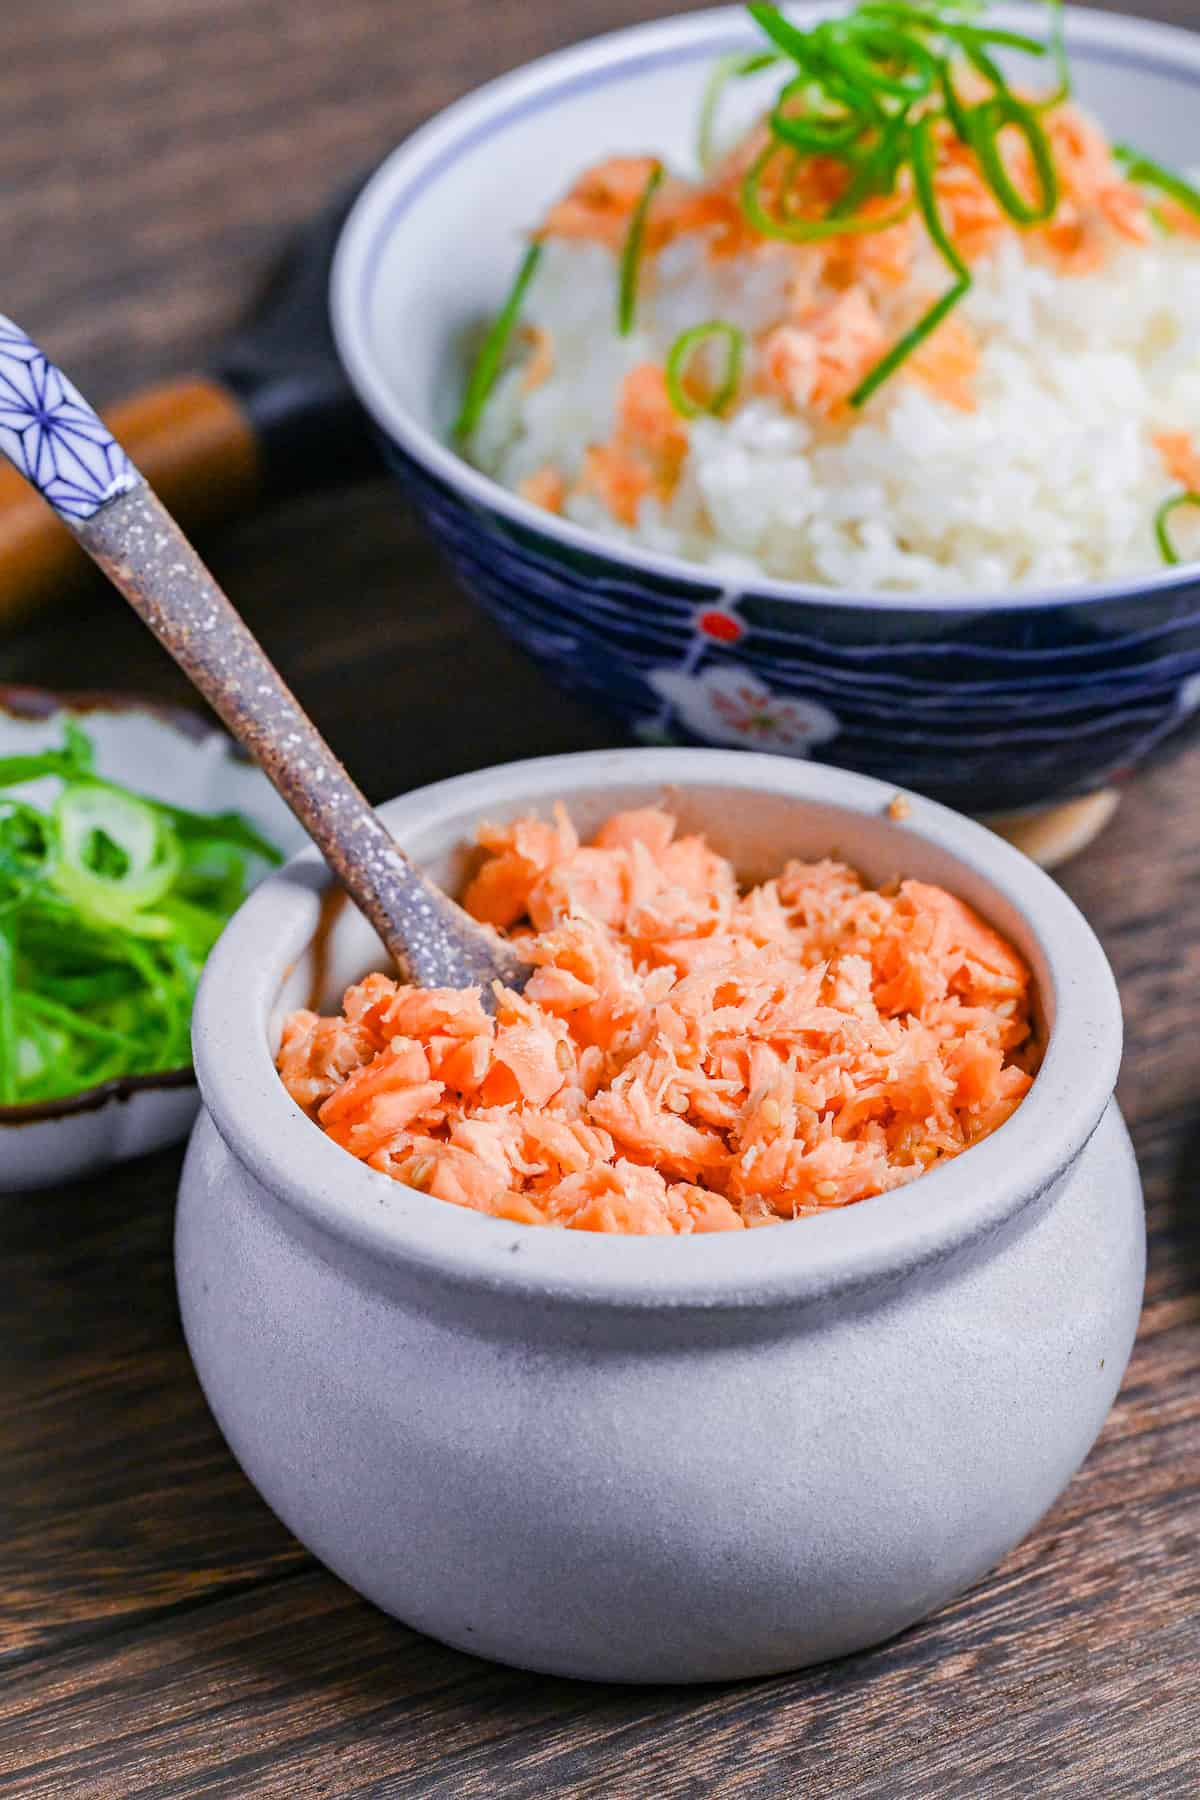 Homemade Japanese-style salmon flakes in a white ceramic pot with brown decorative spoon